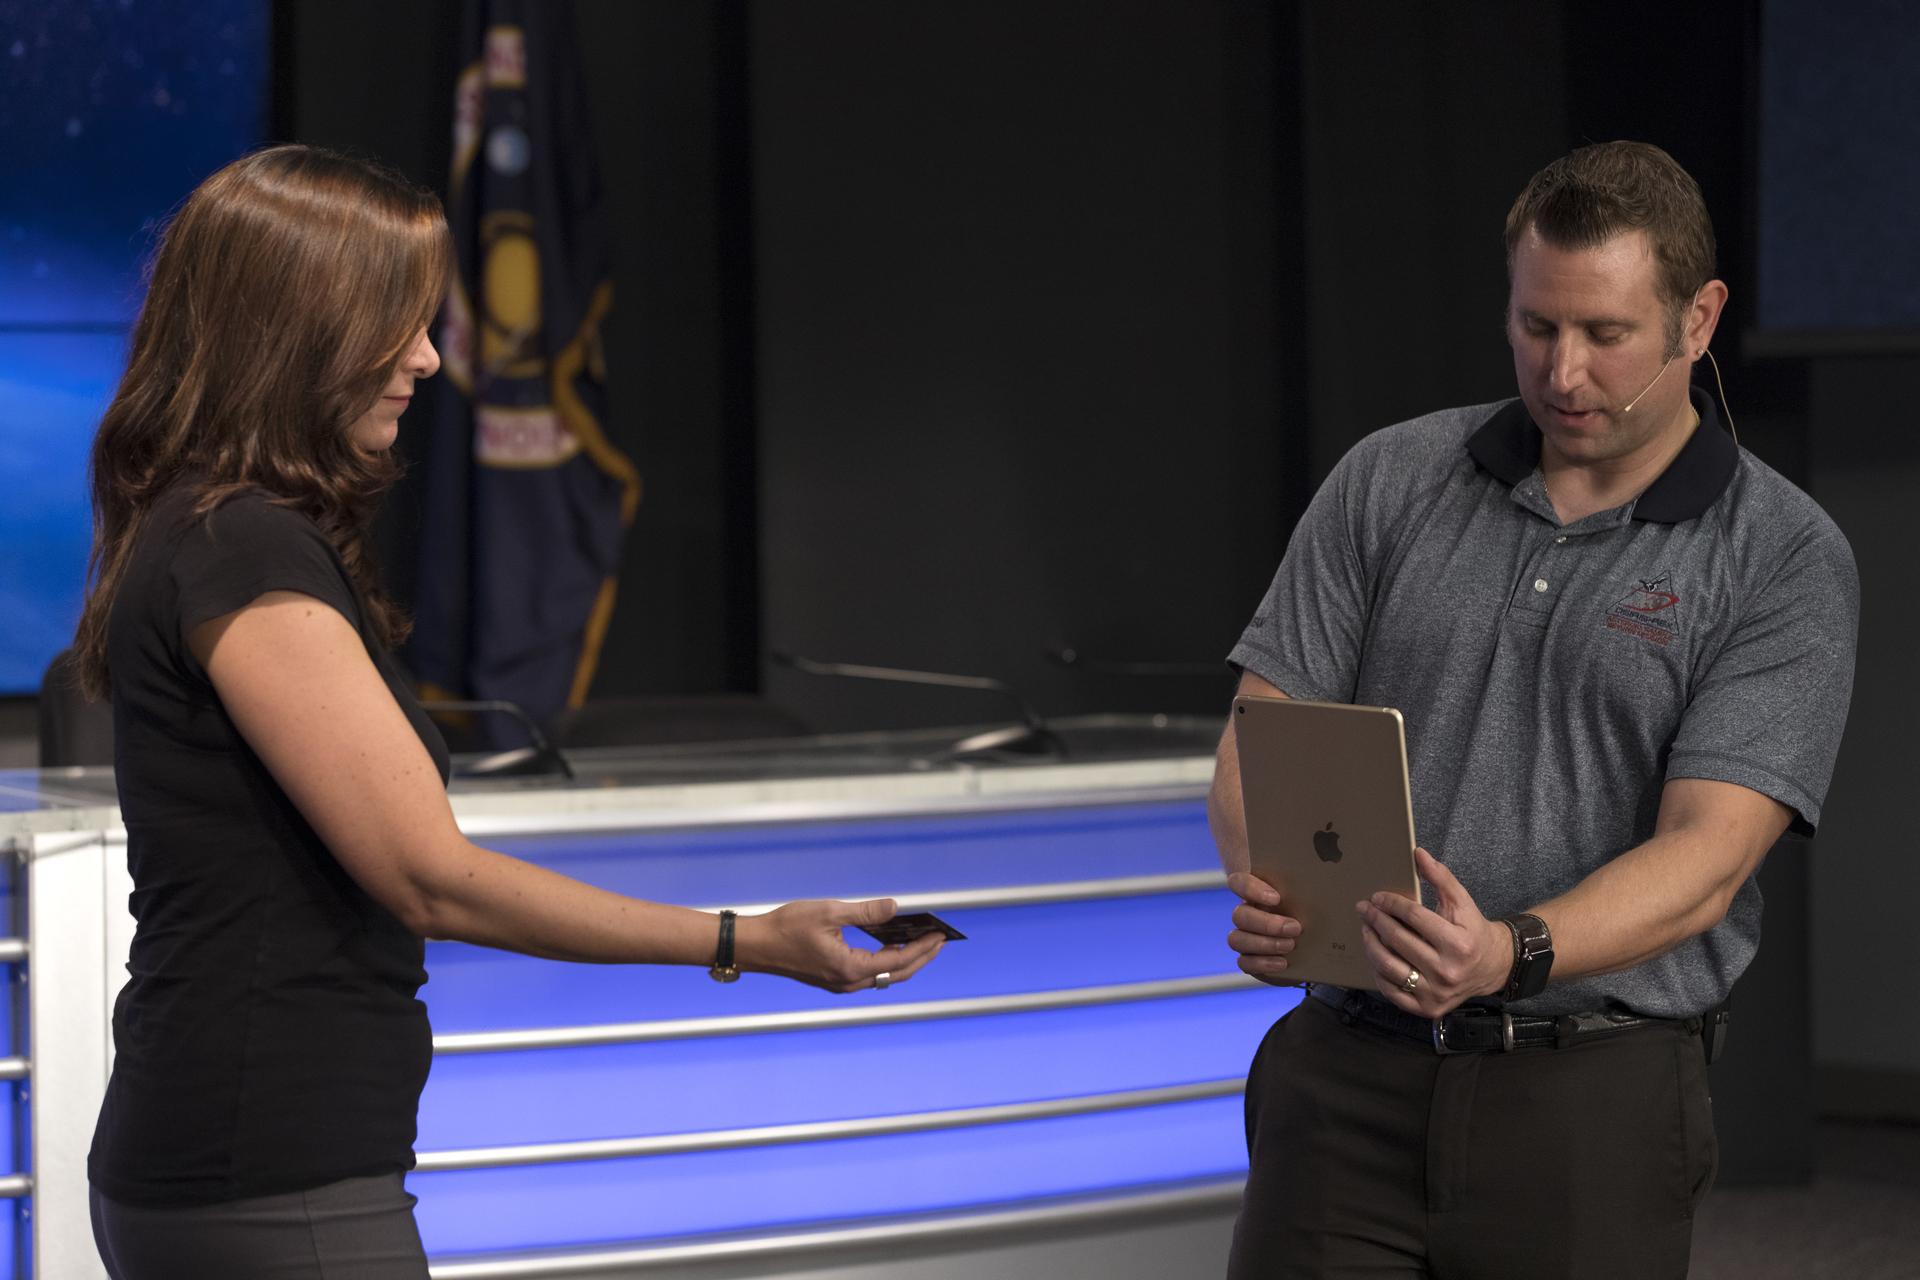 Skip Owen of NASA Launch Services, right, is demonstrating an app that can run on a mobile device such as a smartphone or tablet computer.